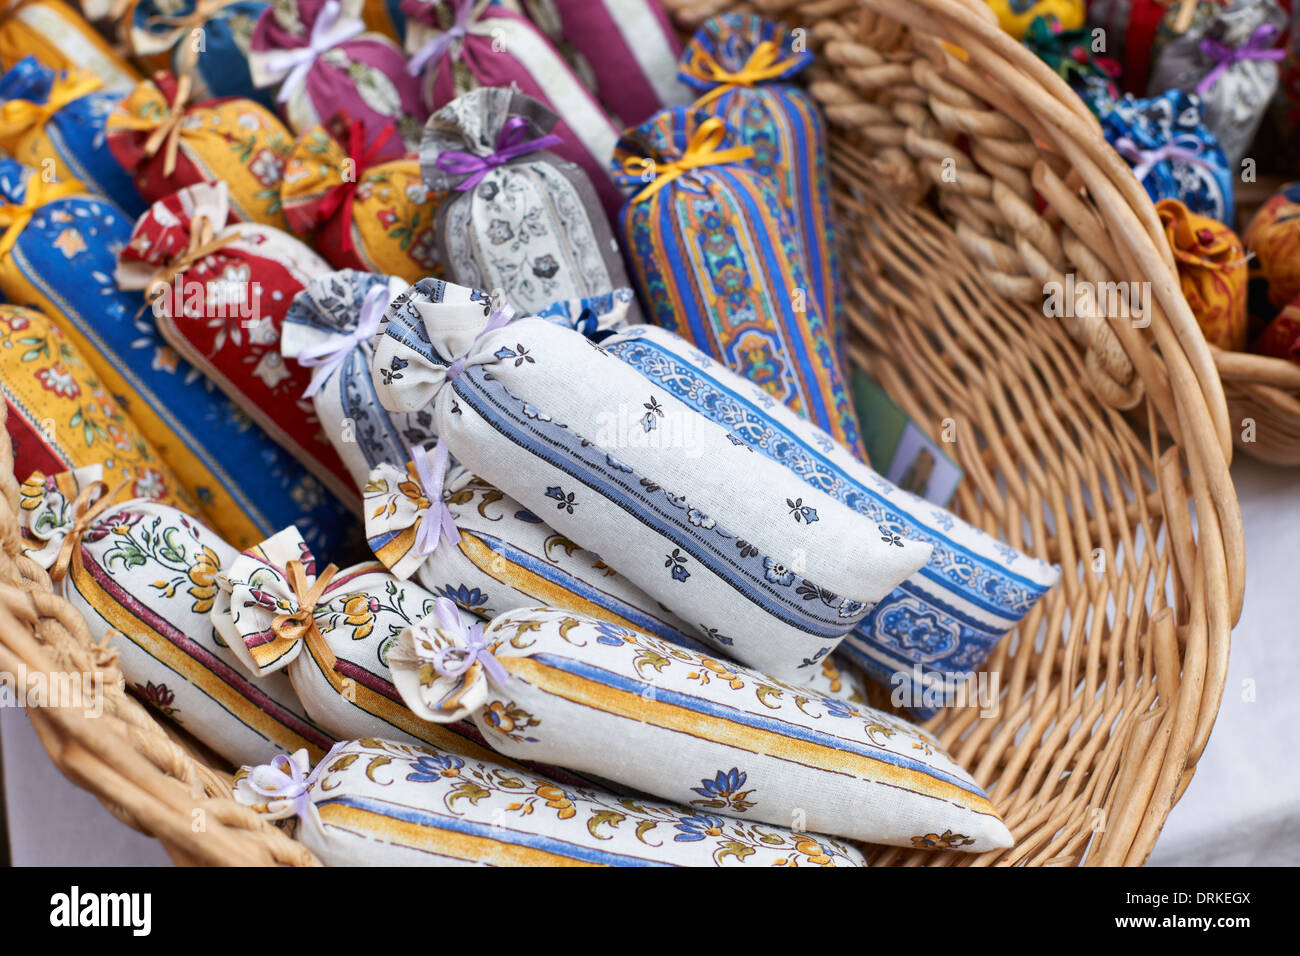 Bags with dried lavender blossoms on the market in Aix en Provence, South France Stock Photo